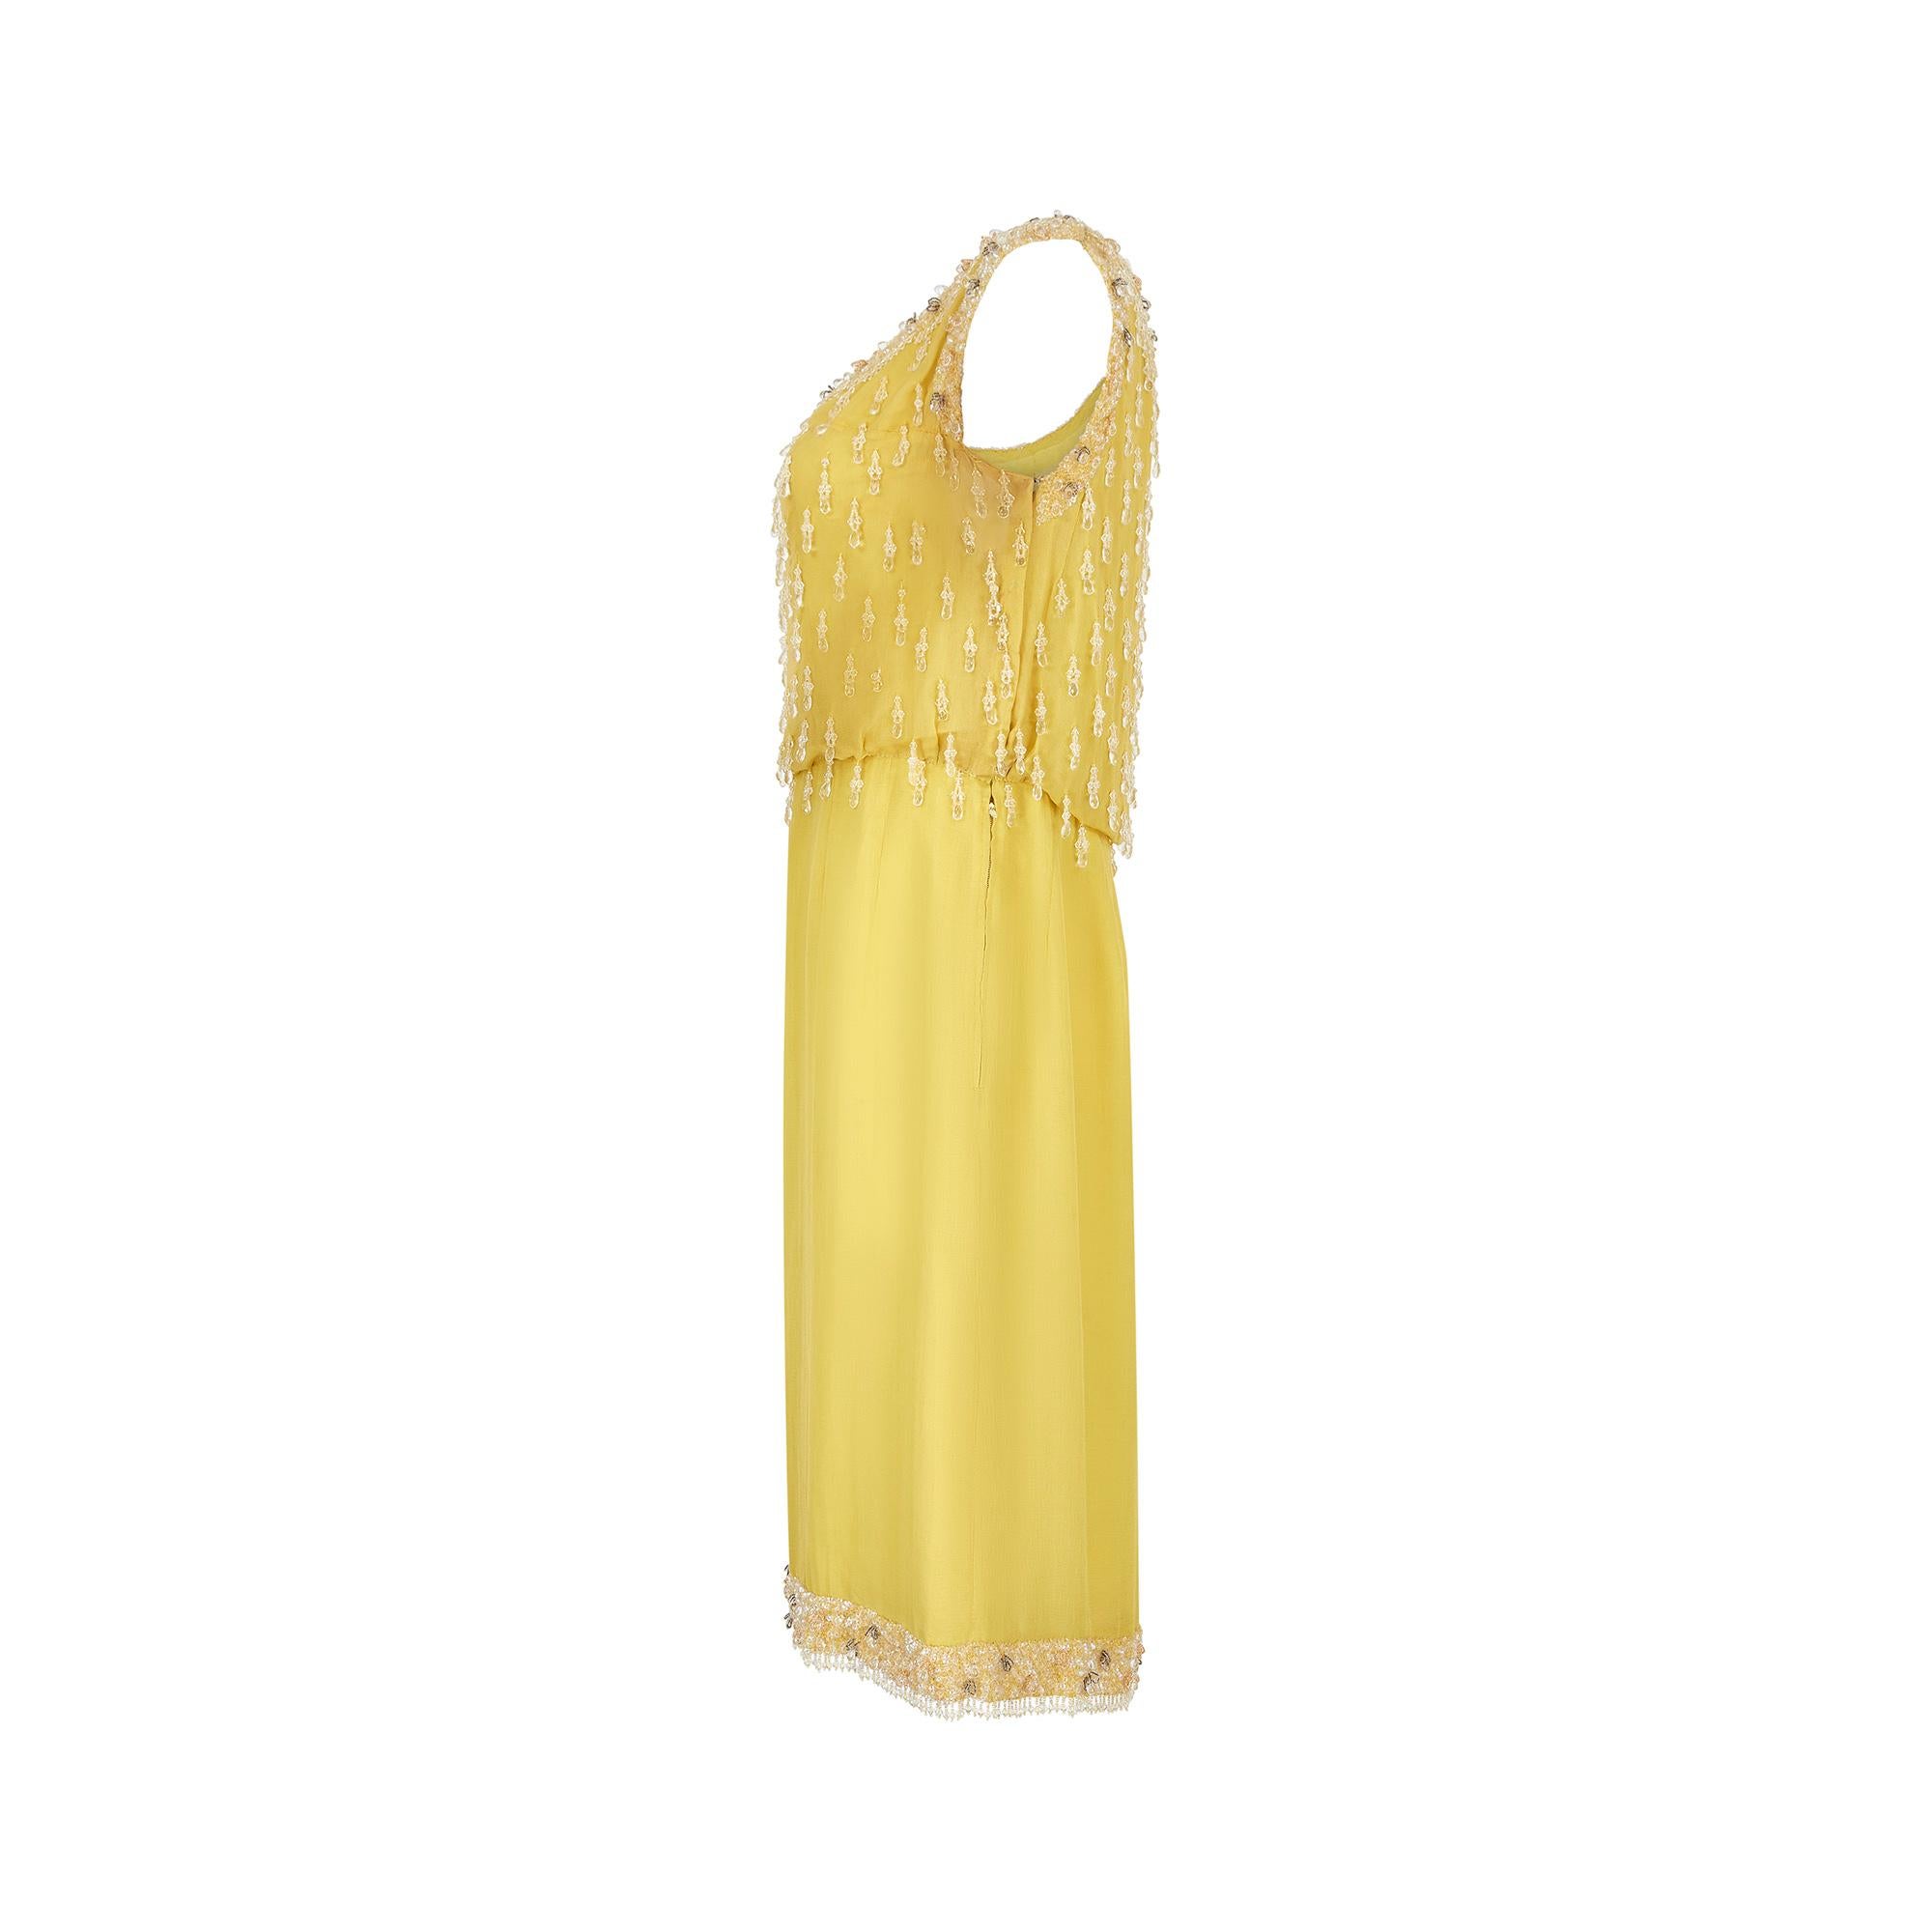 1950s French Couture Yellow Silk Chiffon Sequin Beaded Dress In Excellent Condition For Sale In London, GB